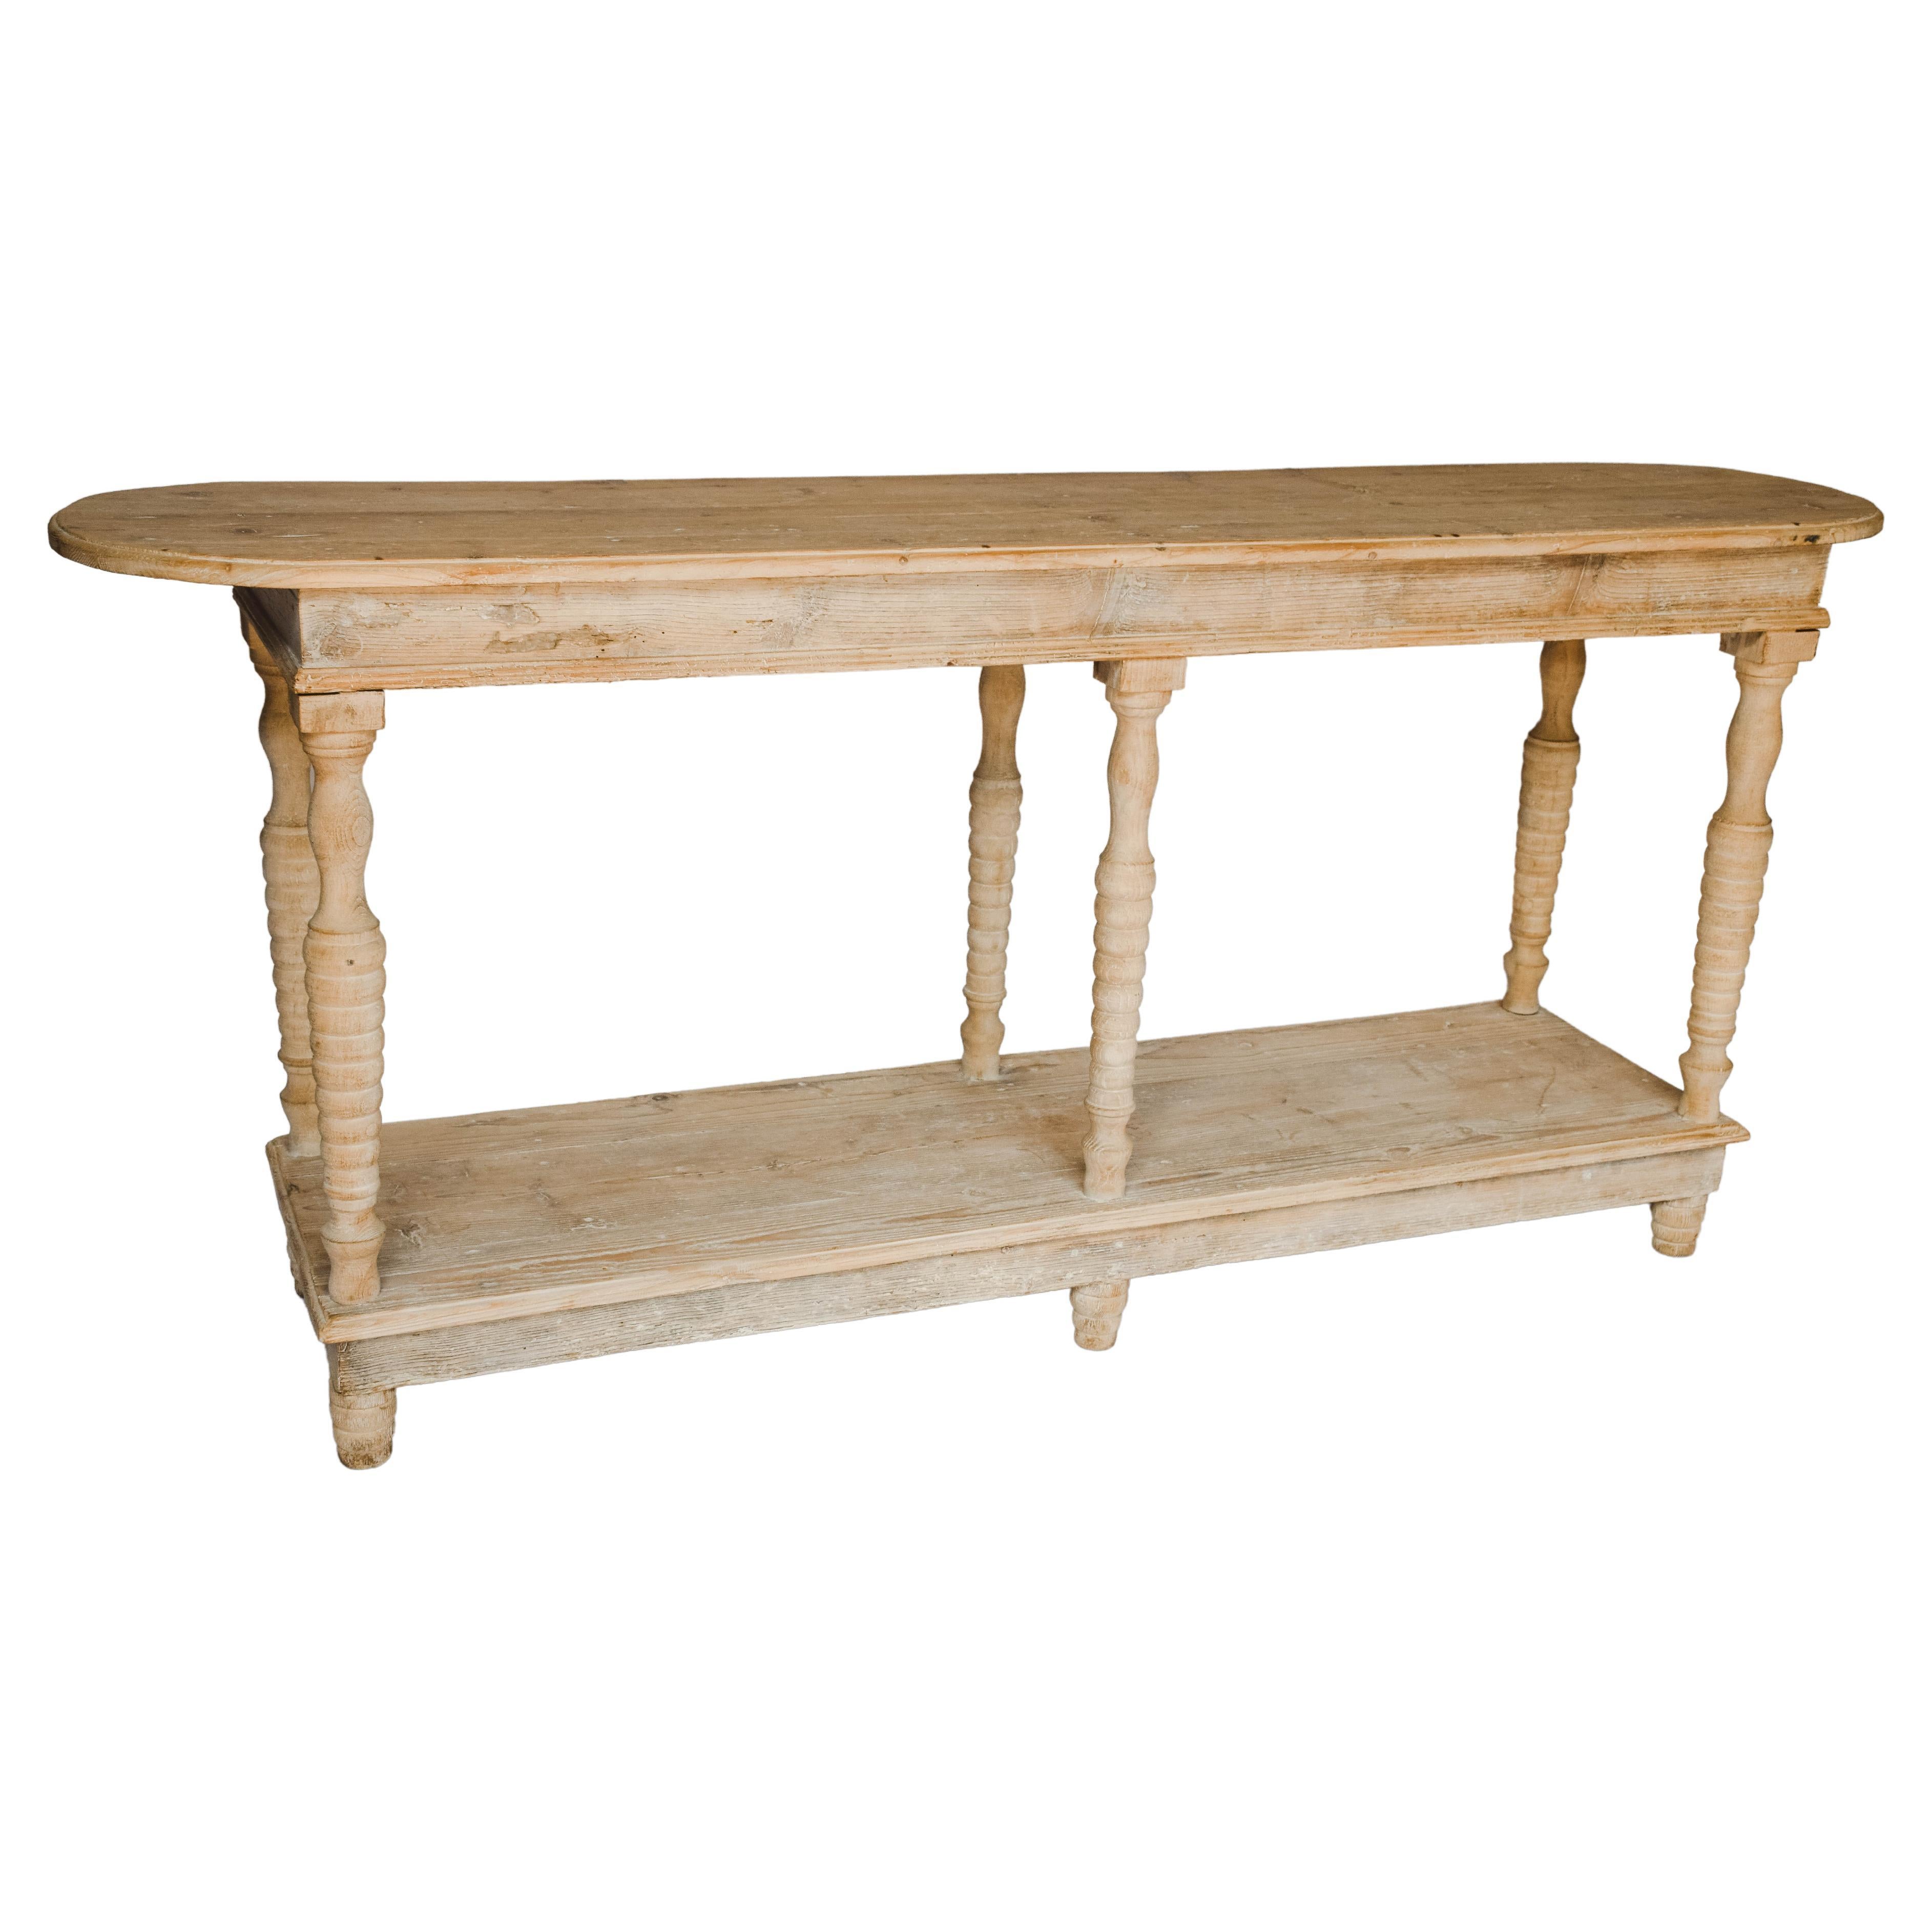 19th C. Italian Console Table in Abete Wood